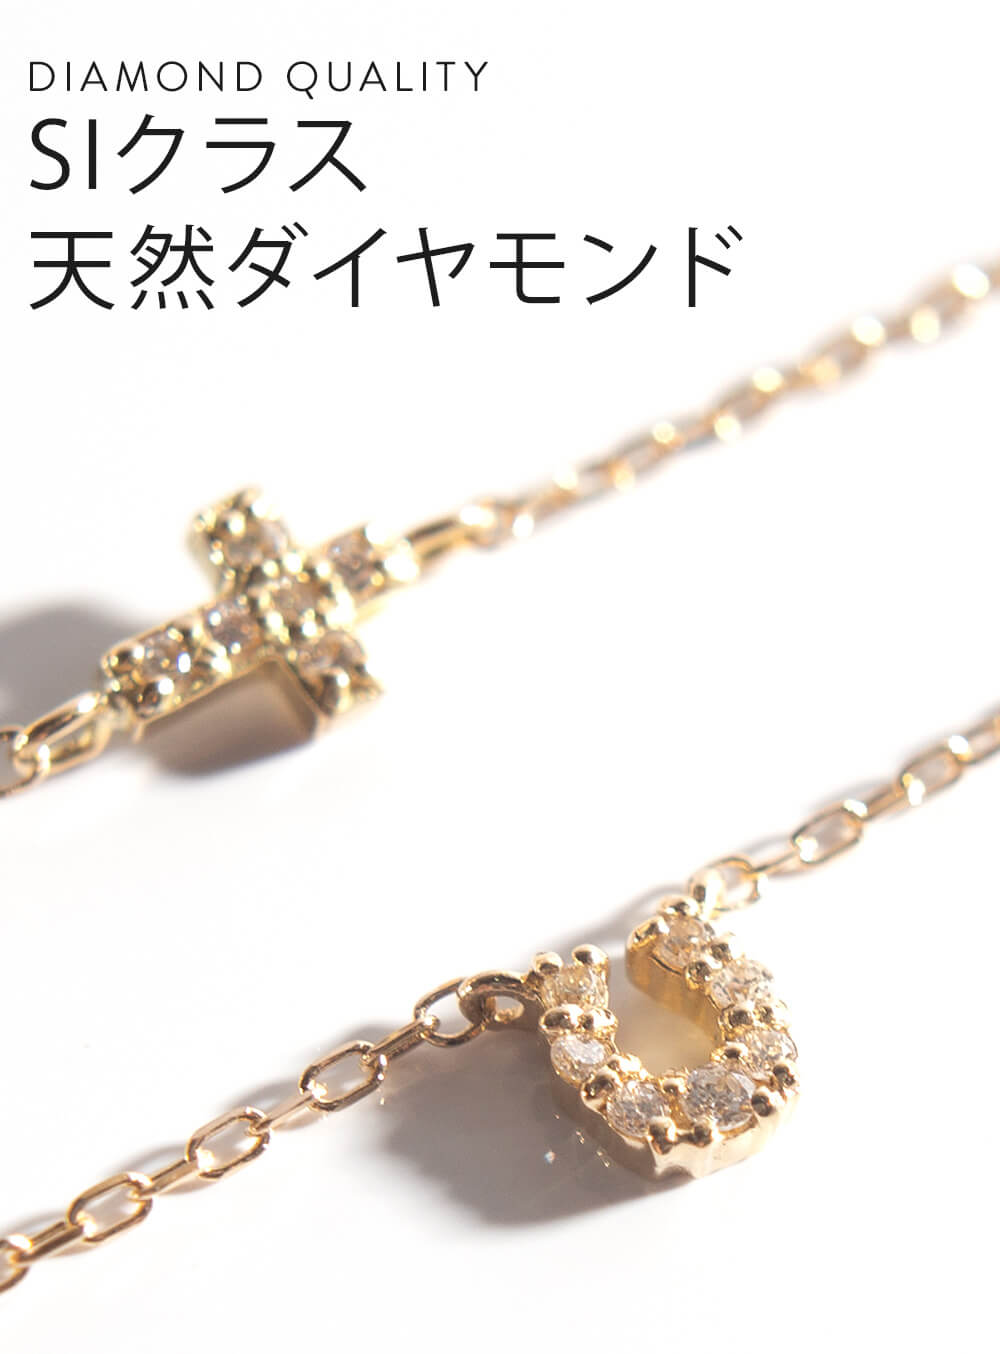 Tiny Diamond Motif Gold Necklace MELE NK -メレネックレス- | Ops 